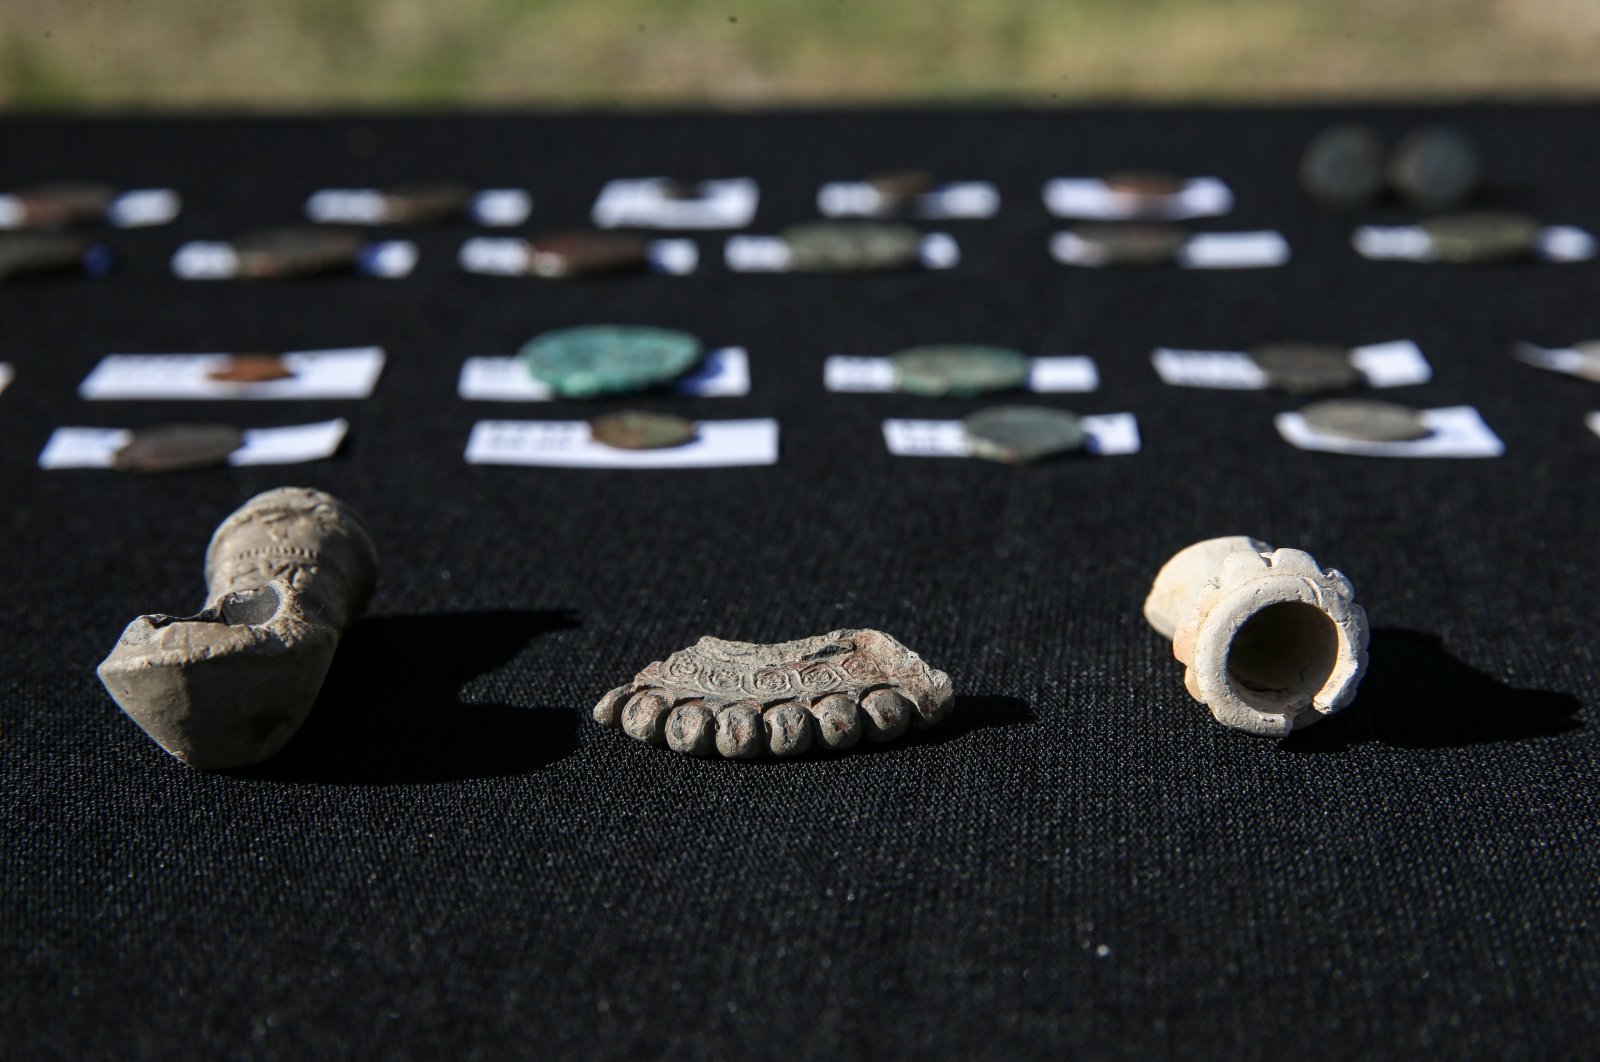 Ceramics from the Neolithic, Roman and Islamic periods have been discovered during excavations at the site in Diyarbakır, southeastern Turkey, Jan. 4, 2021. (AA Photo)